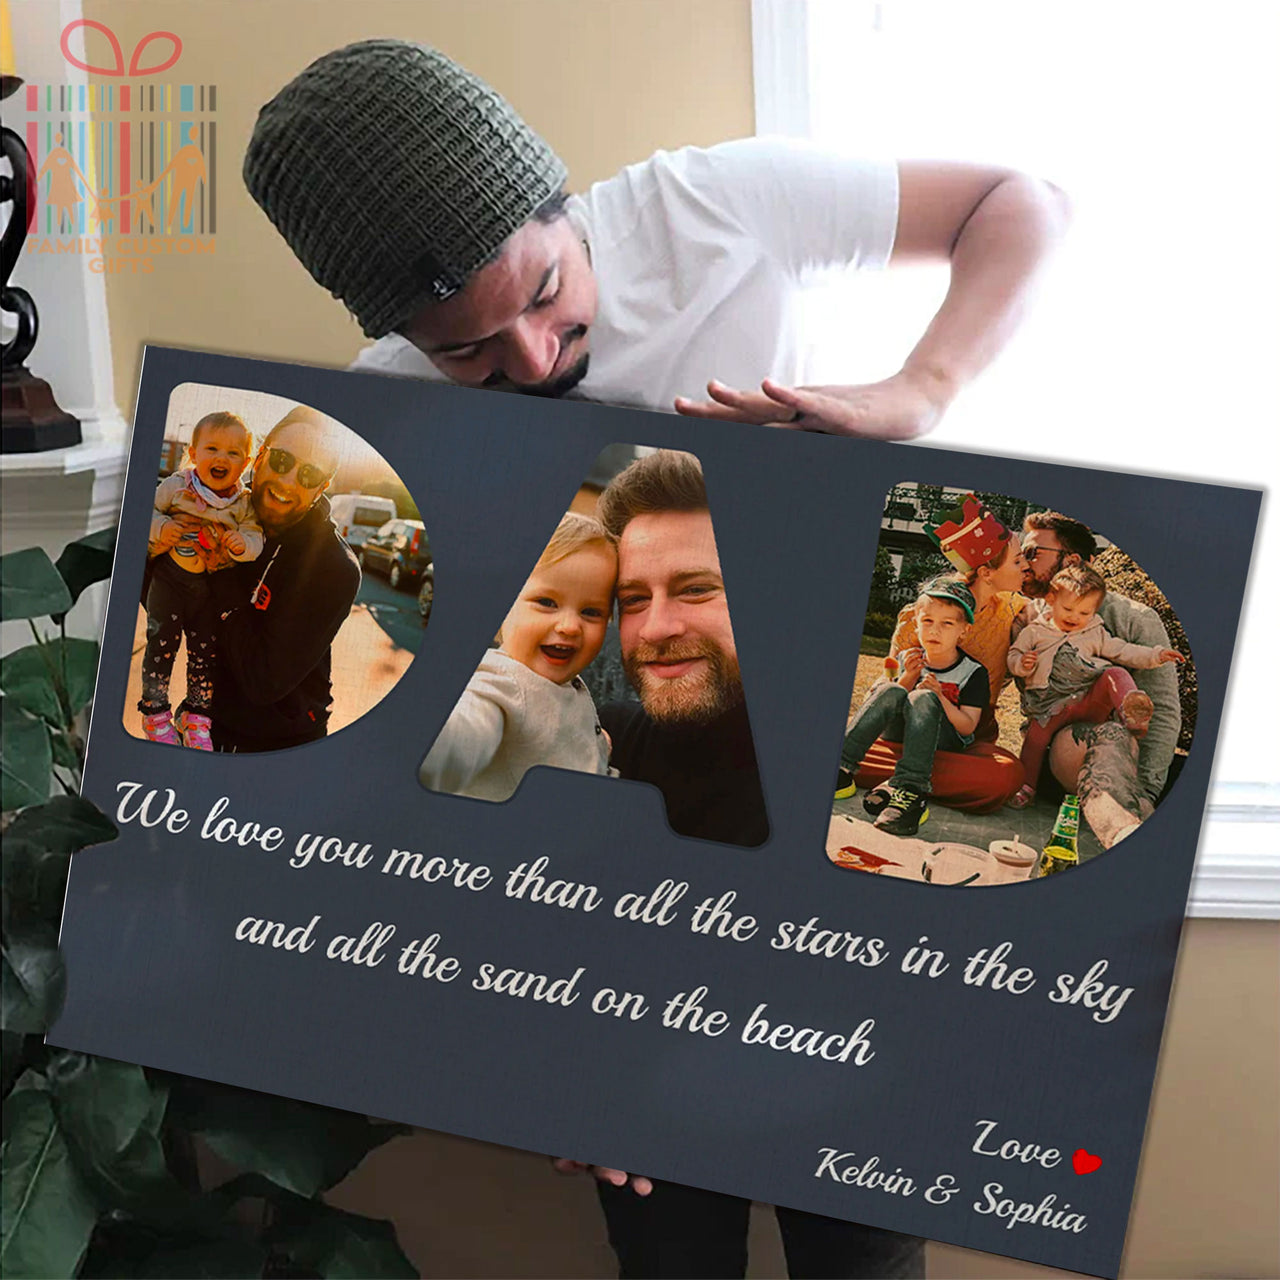 Dad and I Personalized Photo Tile: Gift/Send Personalized Gifts Gifts  Online JVS1177847 |IGP.com